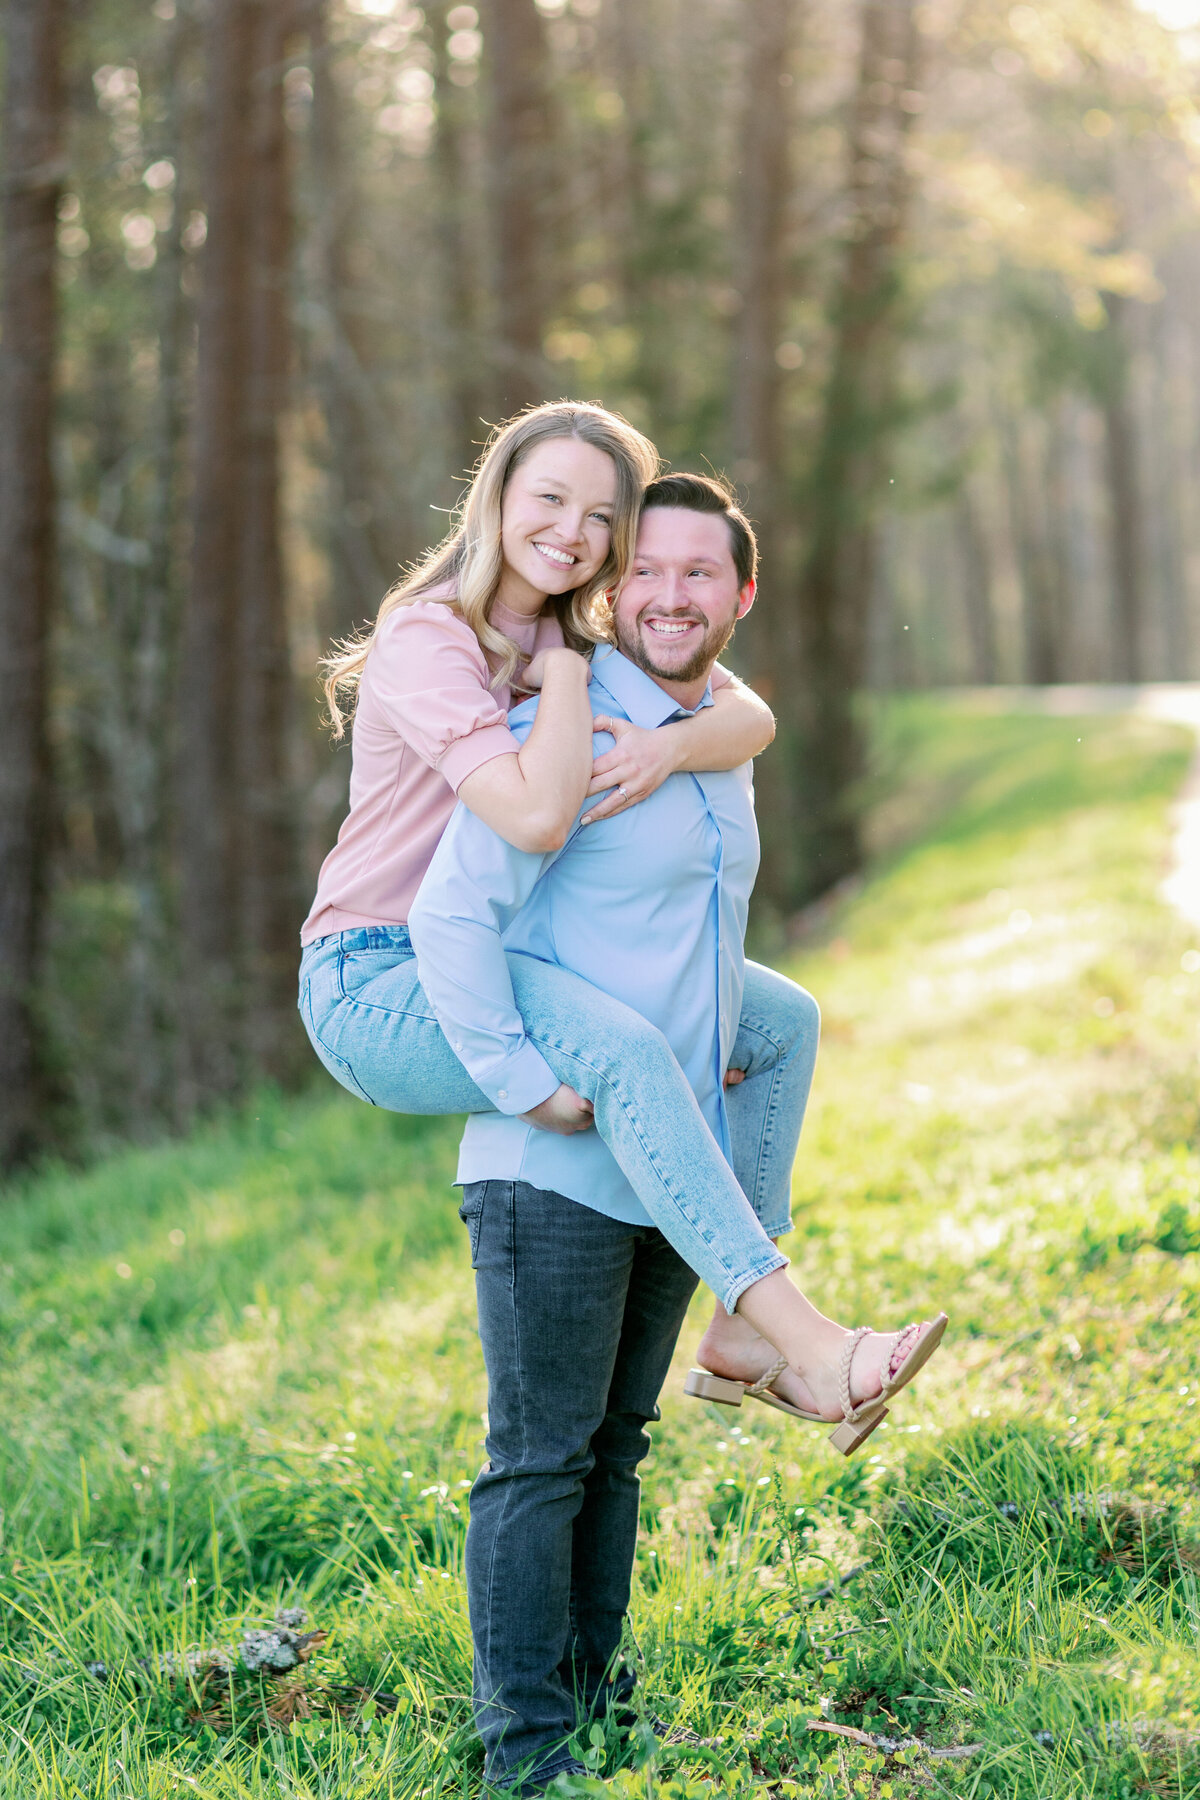 Alyssa and Craig Moutain Engagement - FootHills Parkway - East Tennessee Wedding Photographer - Alaina René Photogrphy-54